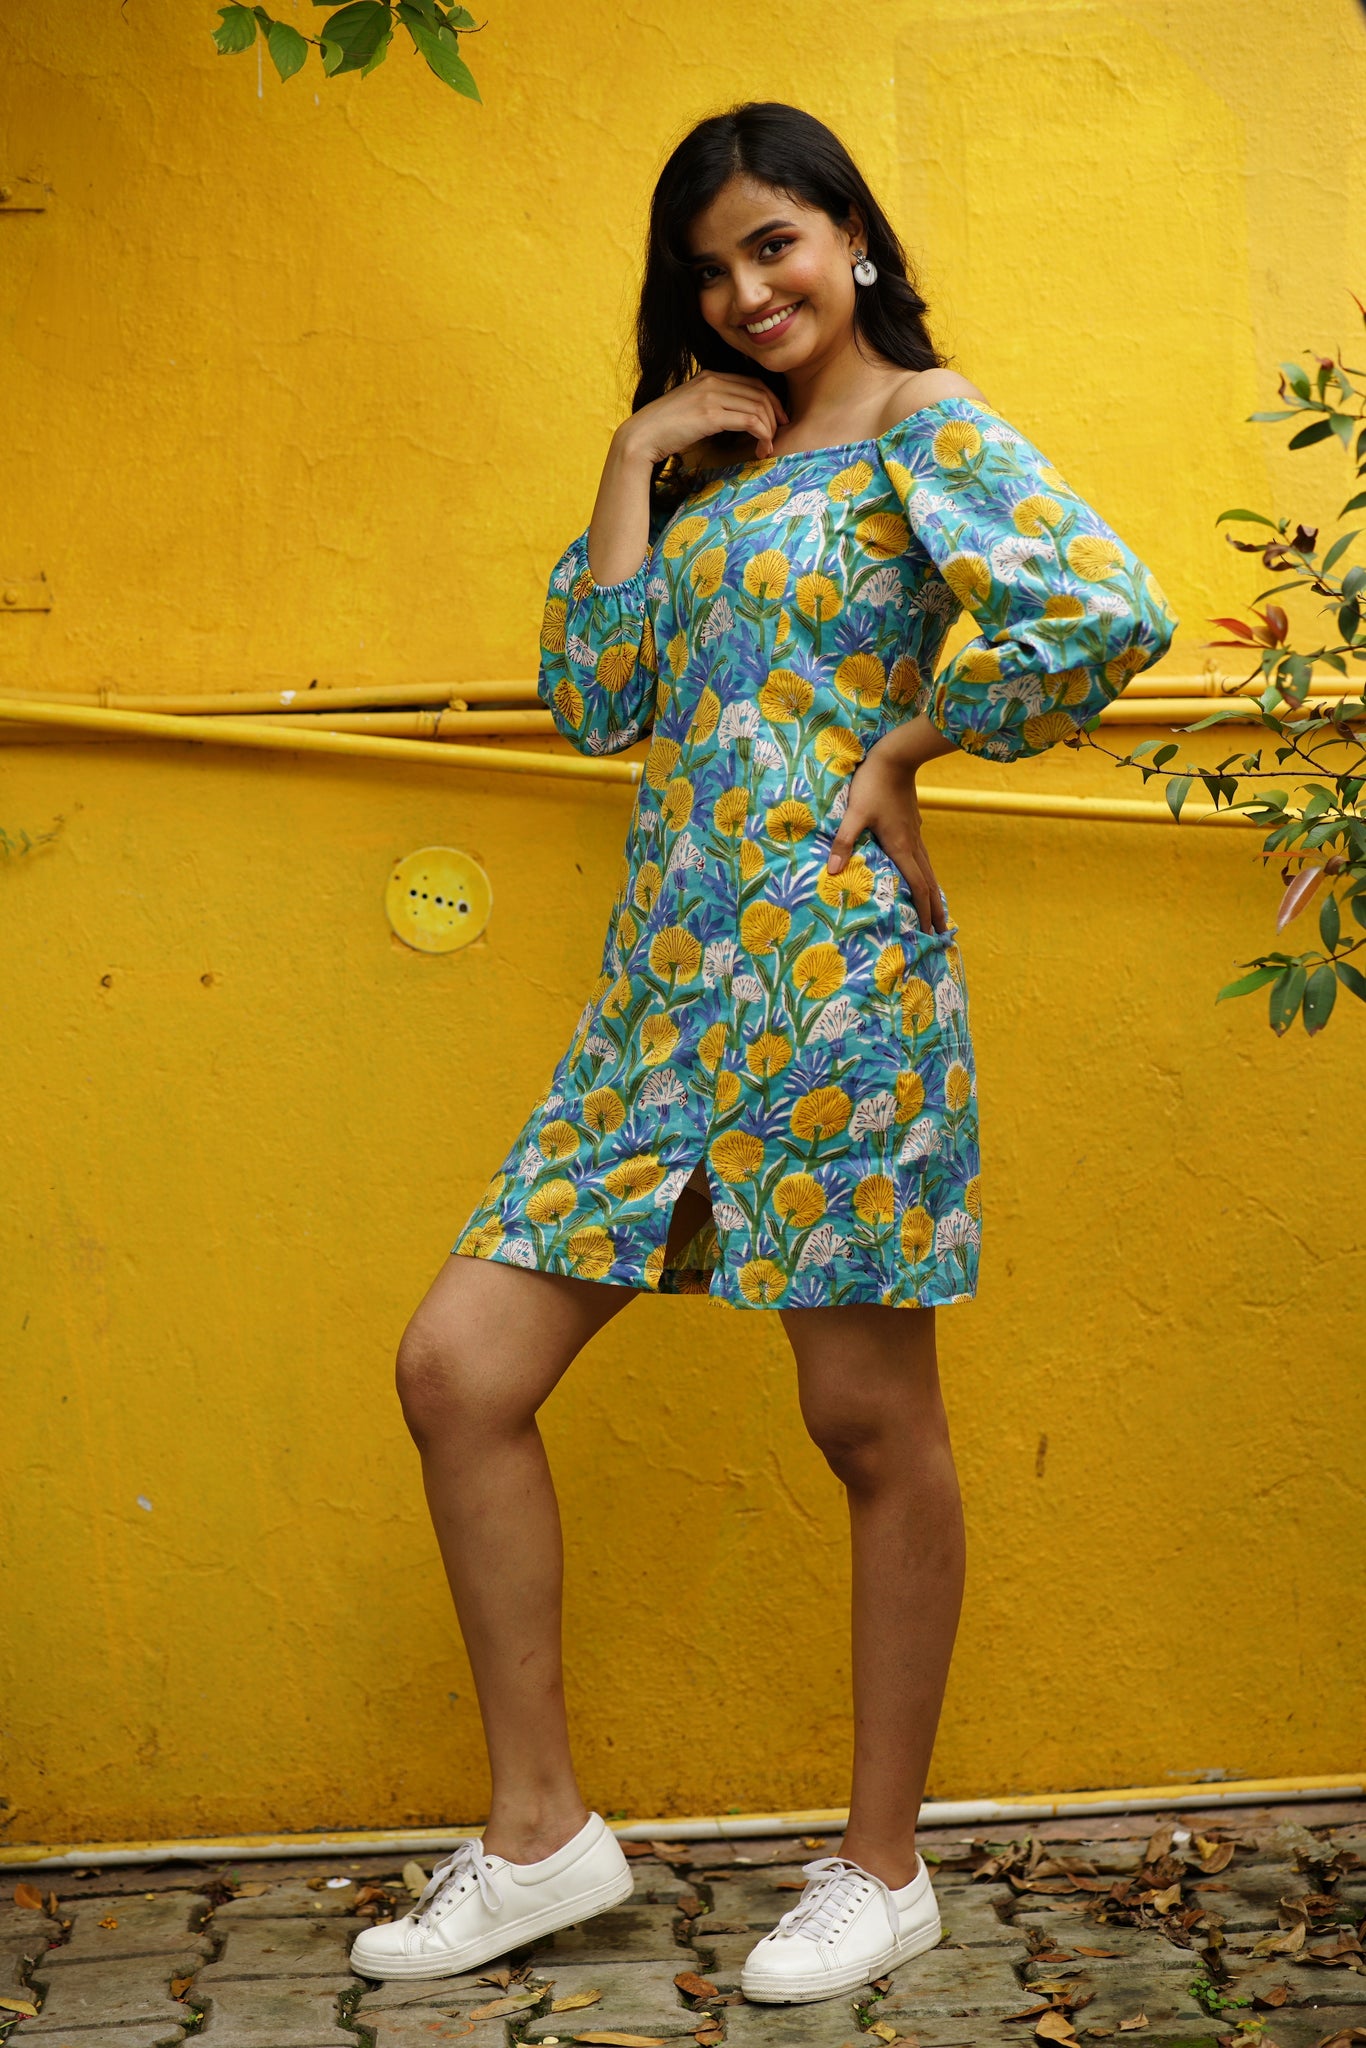 Summer dresses on your mind? Try this long cotton dress and other styles from our collection! - Cotton Village India